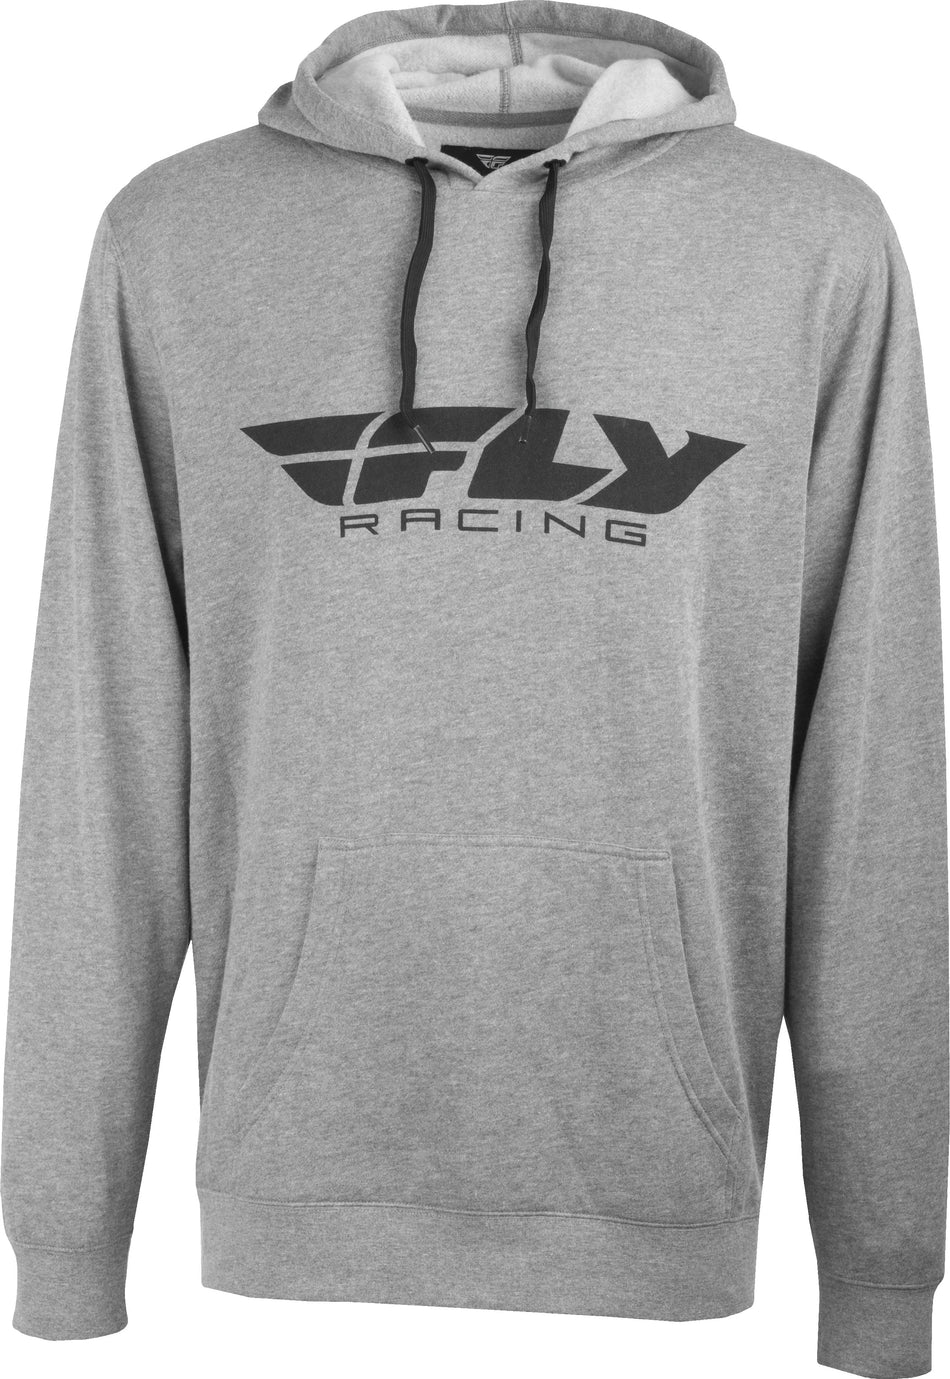 FLY RACING Fly Corporate Pullover Hoodie Grey Heather 2x 354-00362X